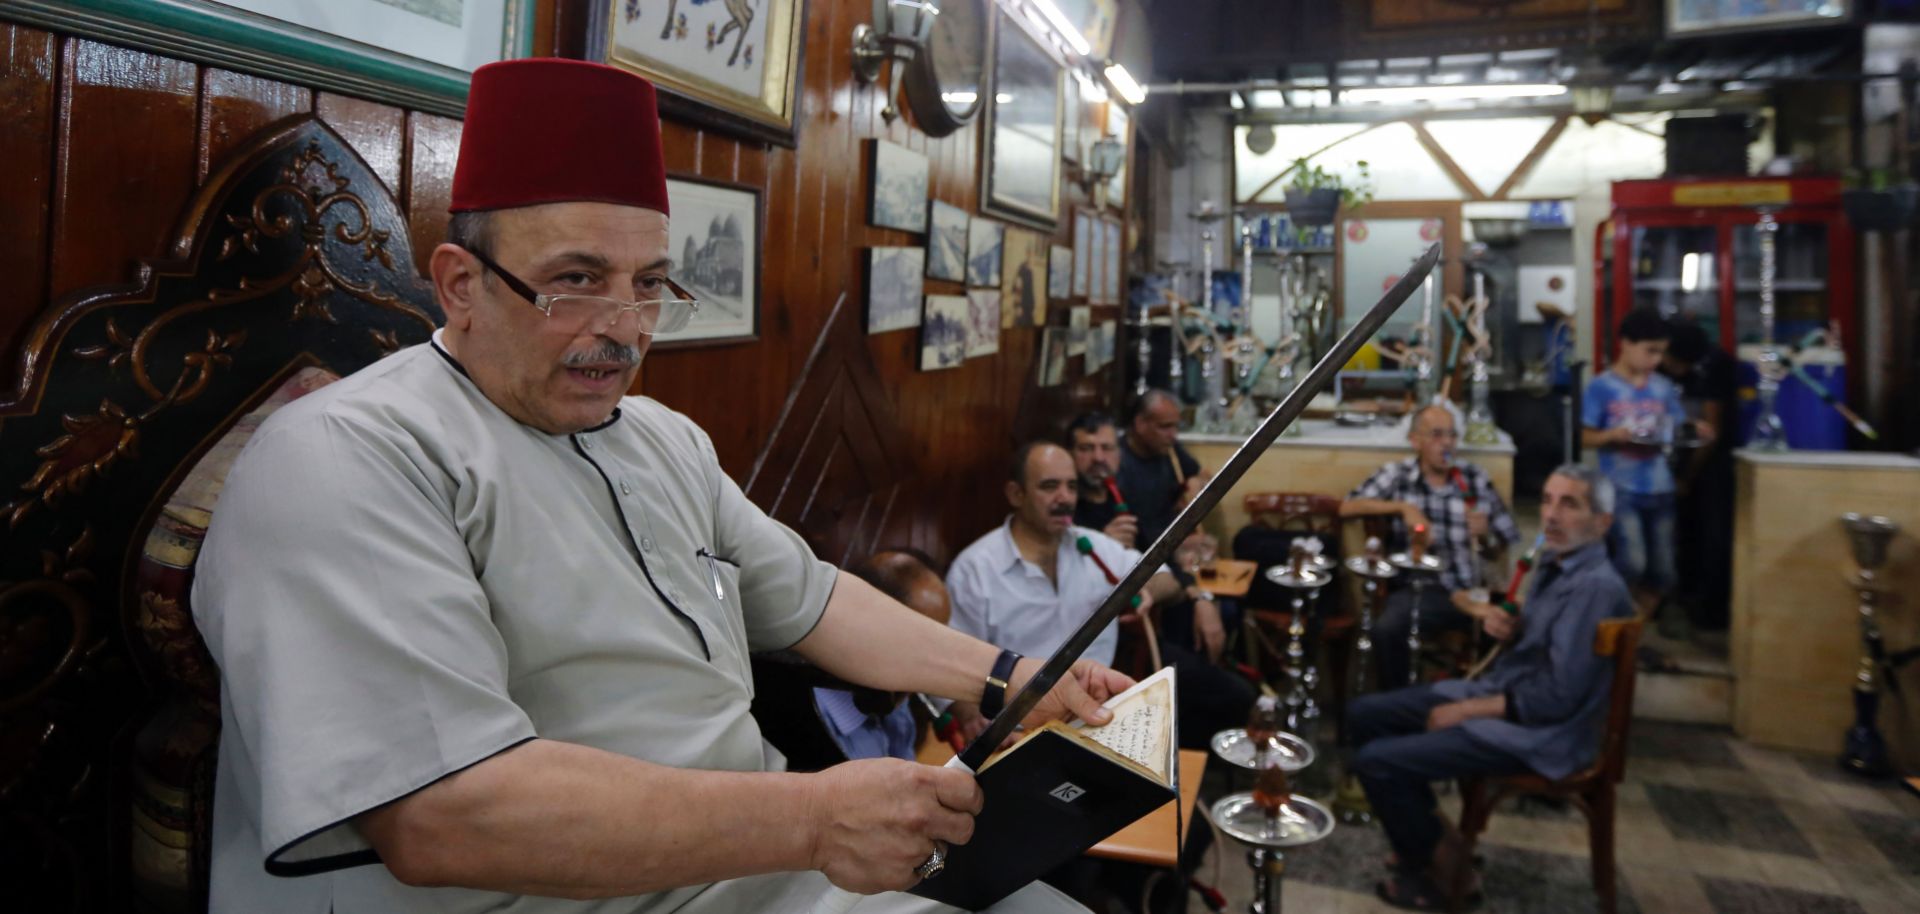 Syrian storyteller Ahmad al-Lahham reads from his book at a coffeehouse in Damascus. The Syrian culture is also alive and well in Amsterdam, where a bookstore features the country's visual and literary arts.